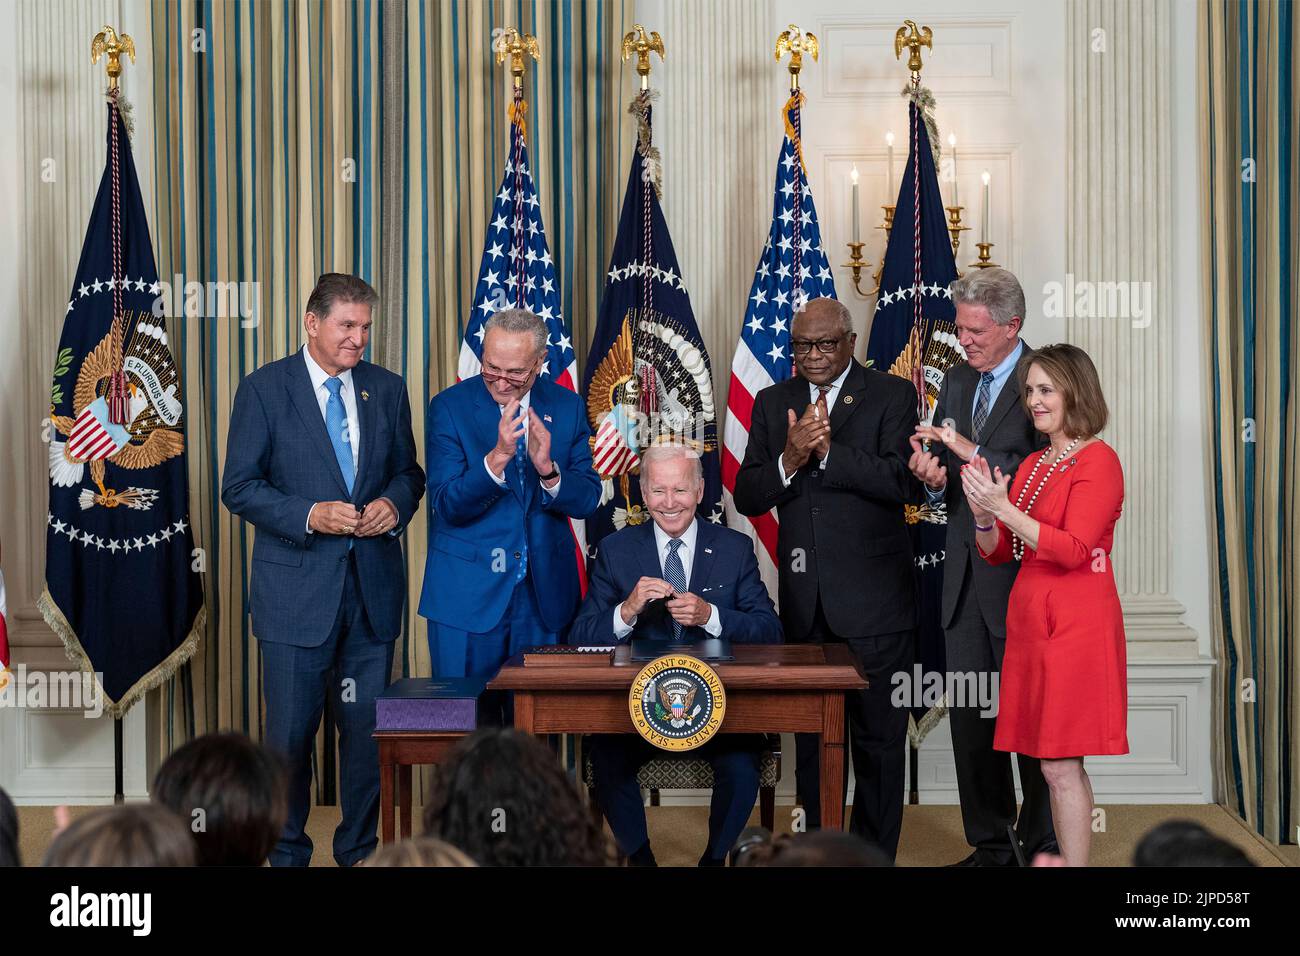 Washington, United States Of America. 16th Aug, 2022. U.S President Joe Biden, President Joe Biden signs the Inflation Reduction Act into law during a ceremony in the State Dining Room of the White House August 16, 2022 in Washington, DC Standing from left: Sen. Joe Manchin, Senate Majority Leader Chuck Schumer, House Majority Whip Rep. James Clyburn, Rep. Frank Pallone, and Rep. Kathy Castor. Credit: Planetpix/Alamy Live News Stock Photo